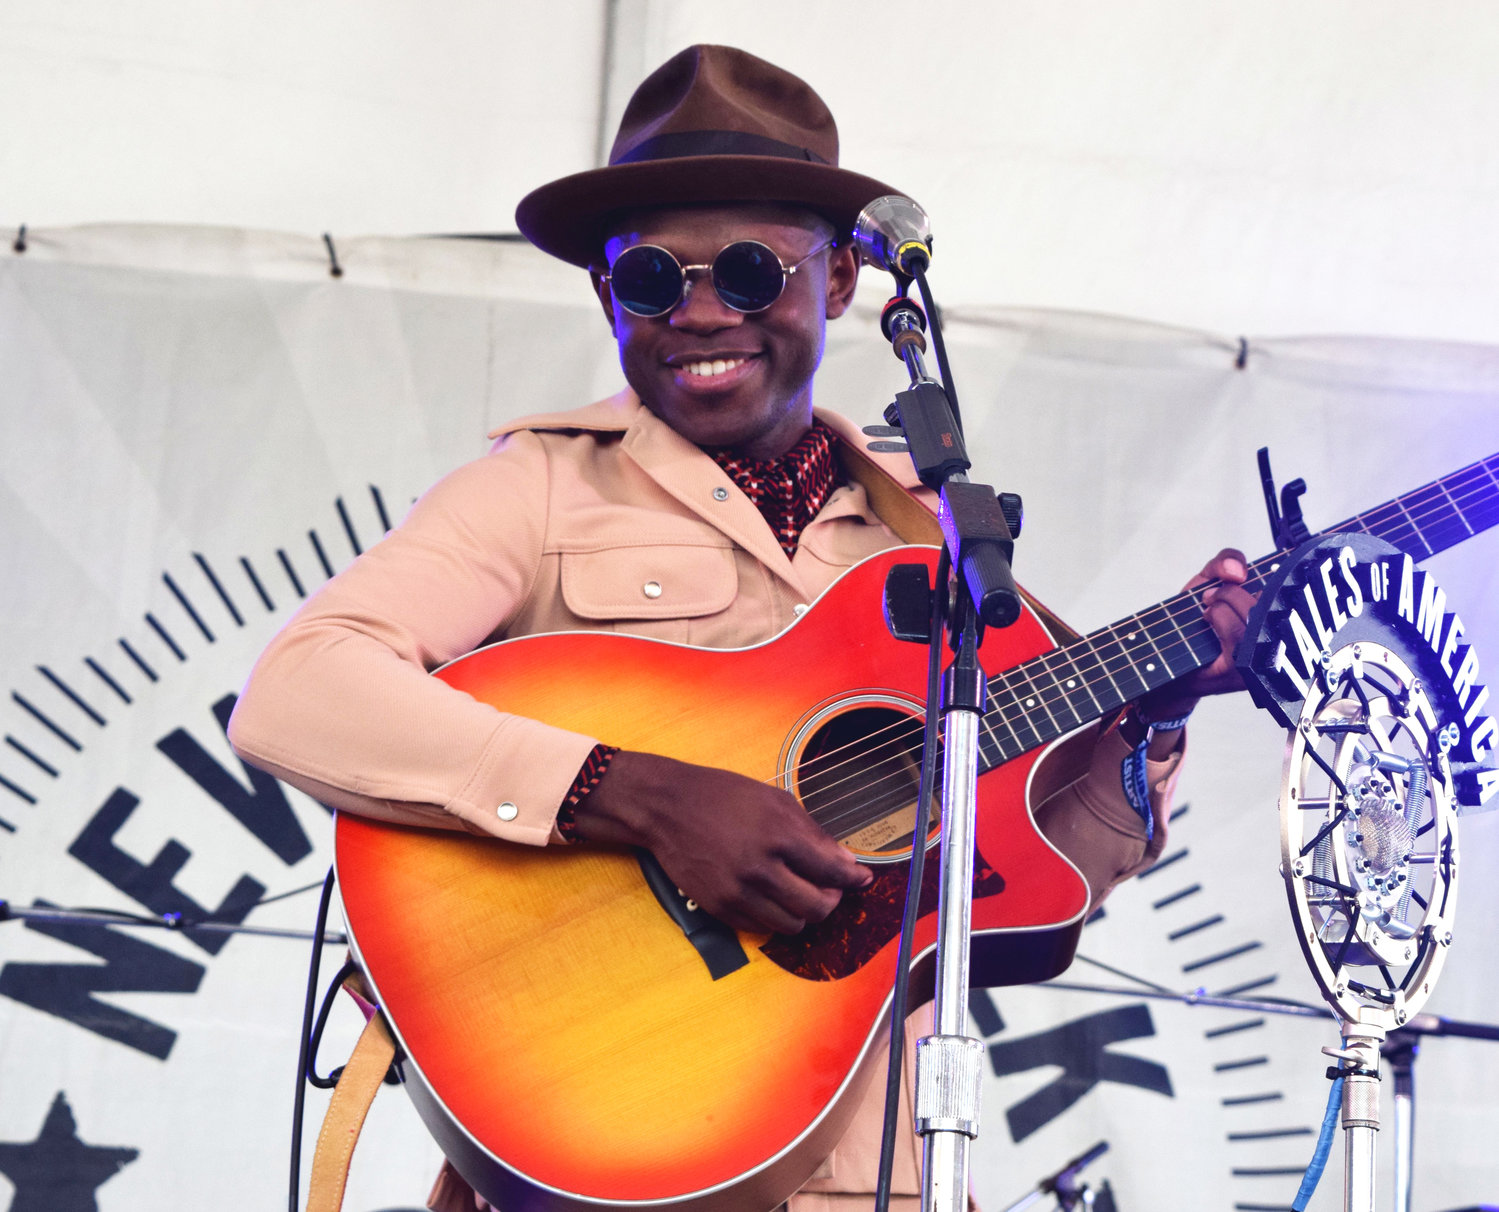 J.S. Ondara, originally from Nairobi, Kenyan, moved to Minnesota to follow the roots of Bob Dylan's music, what he called his "gateway drug" into folk music.